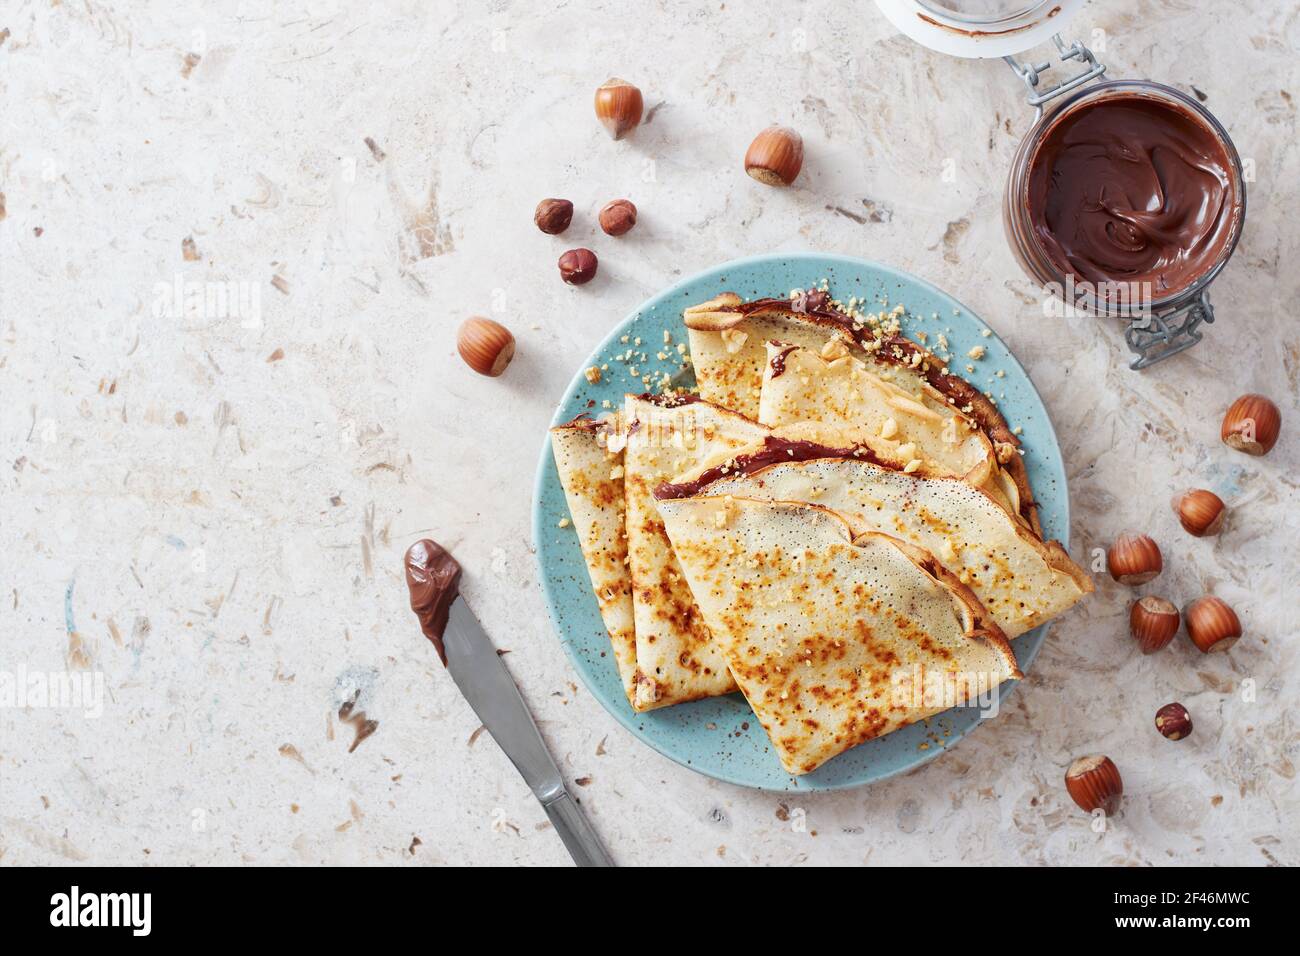 Homemade crepes, tasty thin pancakes with chocolate and nuts. Stock Photo